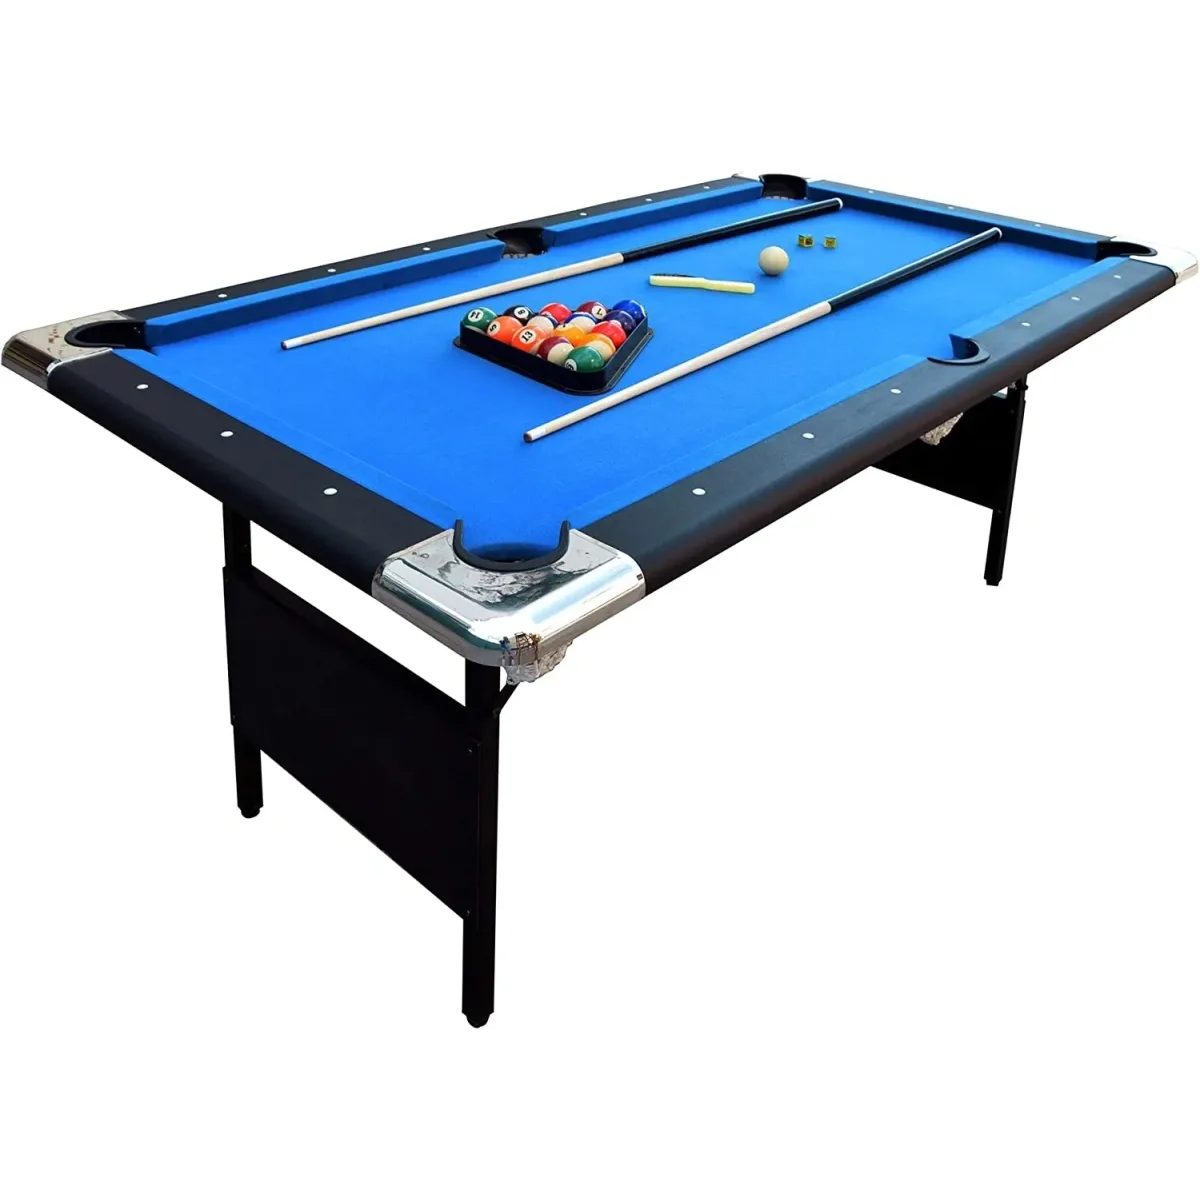 Pool Table – 6 FT – Includes balls and cues. 2